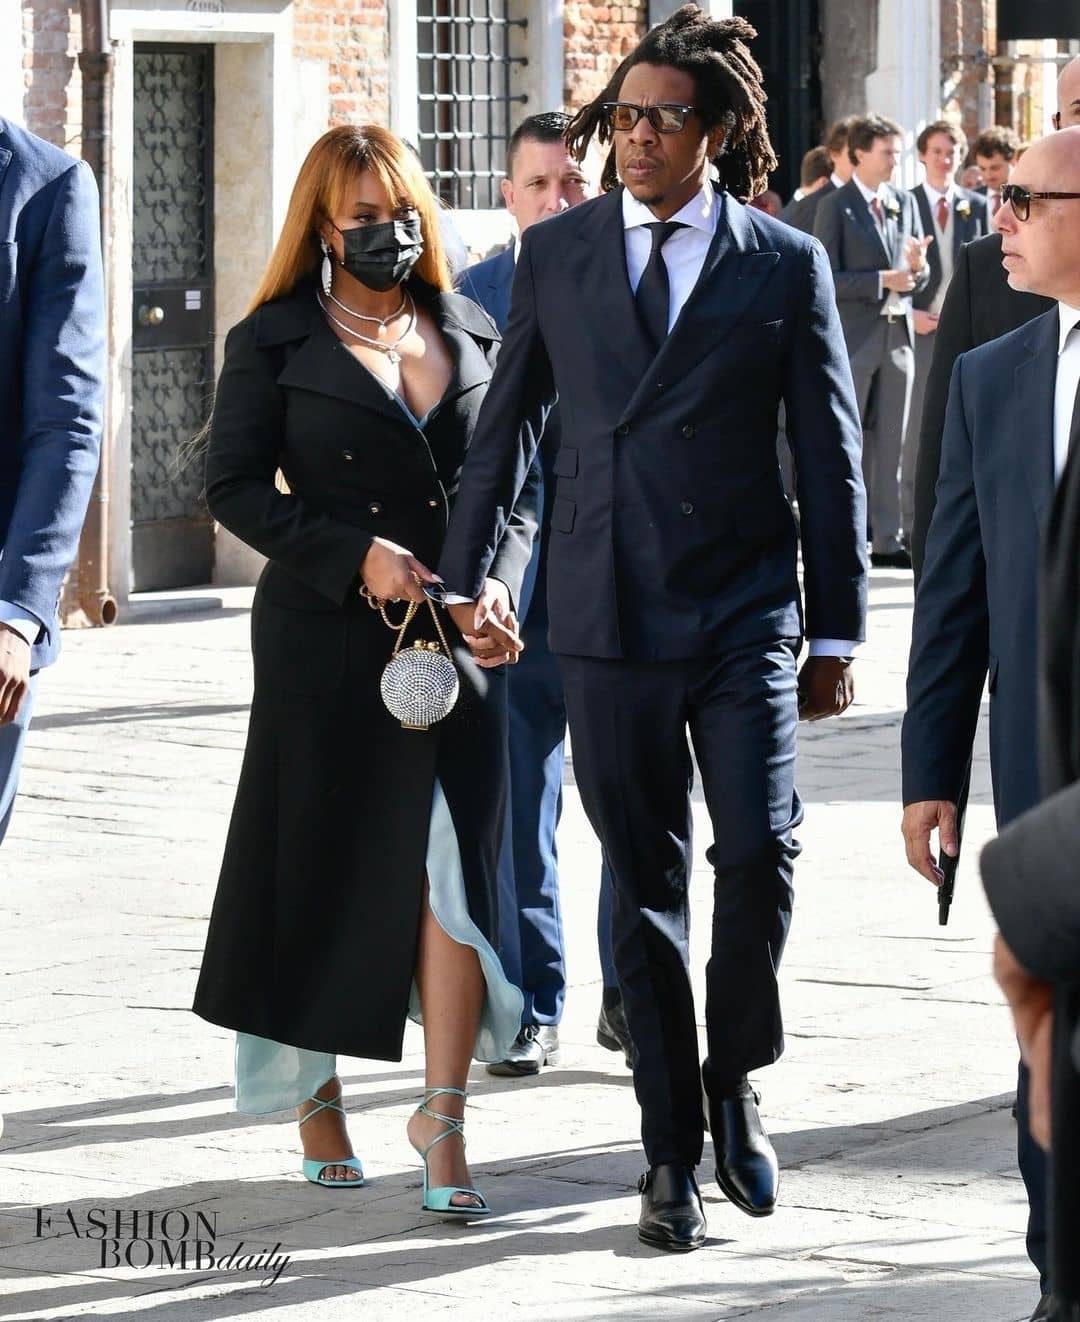 10 Beyonce Wears Mint Green Saint Majavi Dress and Paciotti Lace Up Sandals to Alexandre Arnault and Geraldine Guyot Wedding in Venice